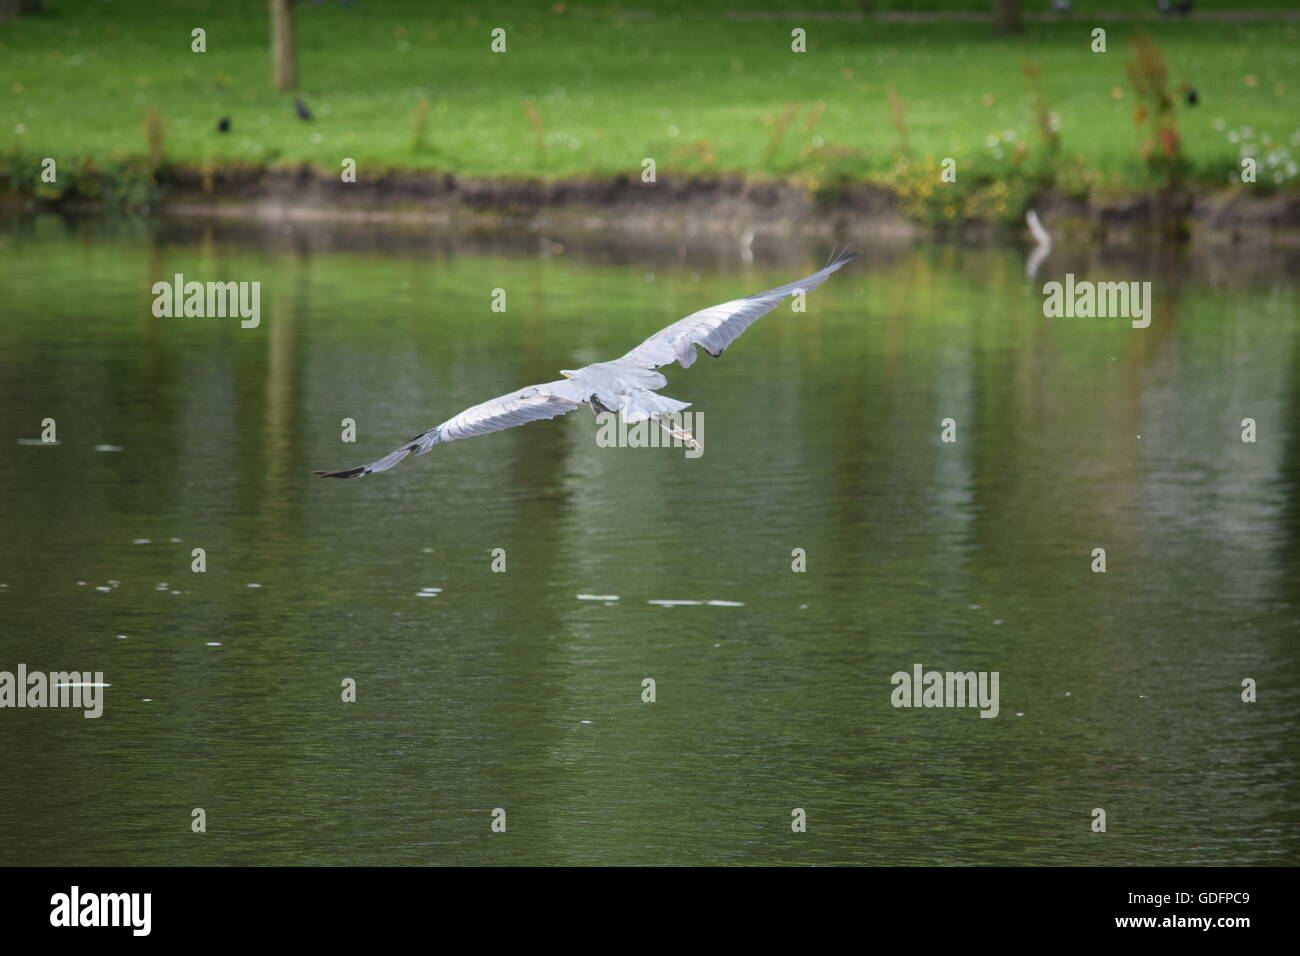 Heron flying over the water Stock Photo